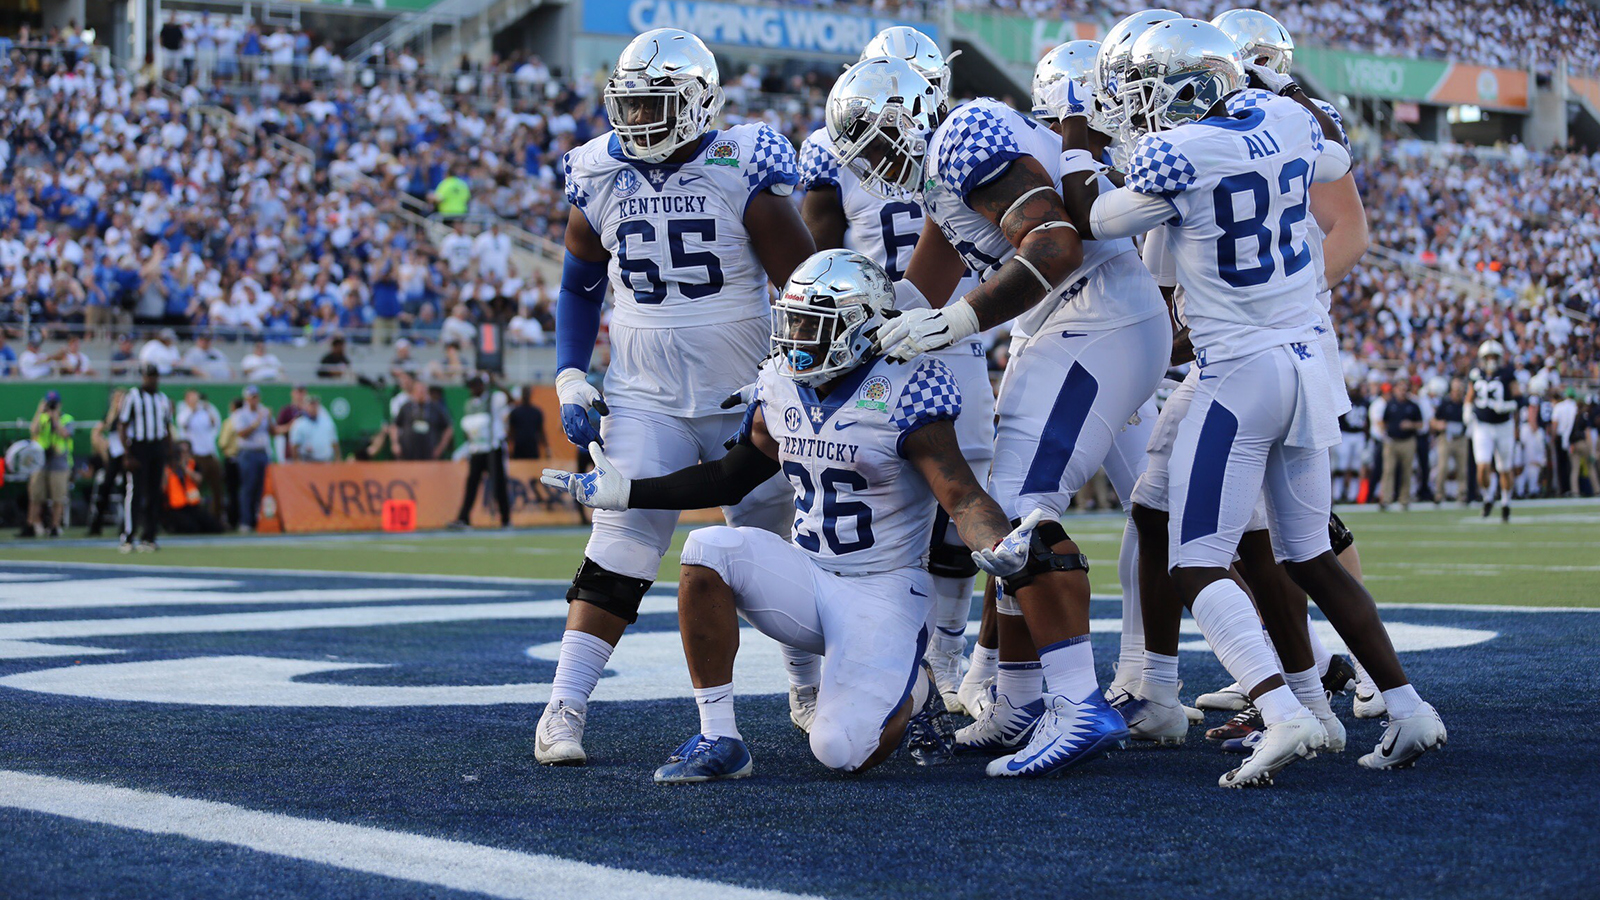 Picture-Perfect Ending: Kentucky Tops Penn State in VRBO Citrus Bowl